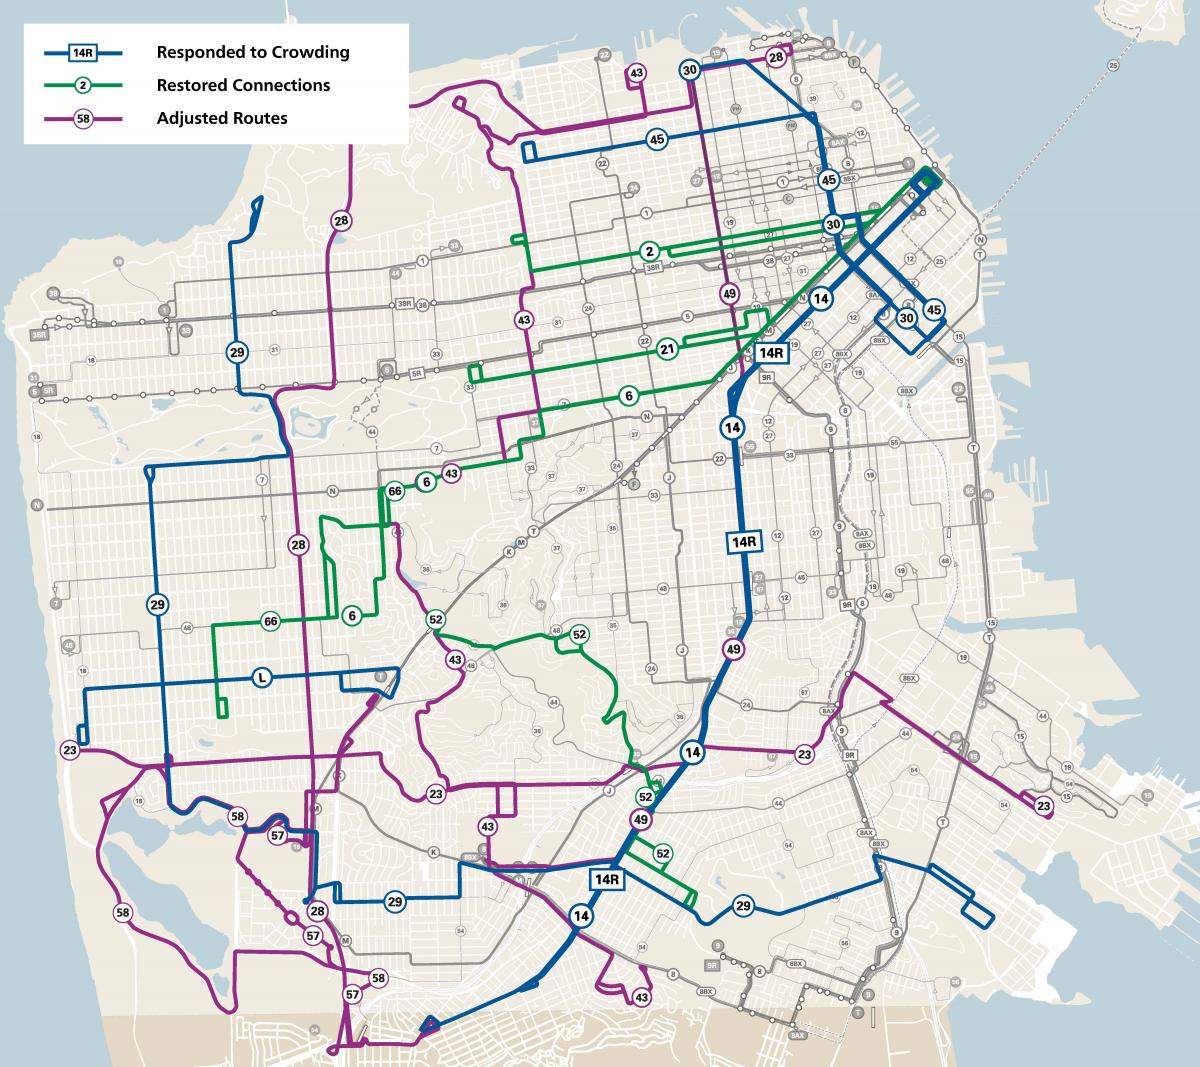 Map showing the routes that are part of the July 2022 service changes. Routes responding to crowding: 14R Mission Rapid, 29 Sunset, 45 Union-Stockton, 58 Lake Merced, L Bus. Routes that are restoring connections: 2 Sutter, 6 Parnassus, 21 Hayes. Routes being adjusted or restored: 23 Monterey, 28 19th Avenue, 43 Masonic, 49 Van Ness, 52 Excelsior, 57 Parkmerced, 58 Lake Merced, 66 Quintara.